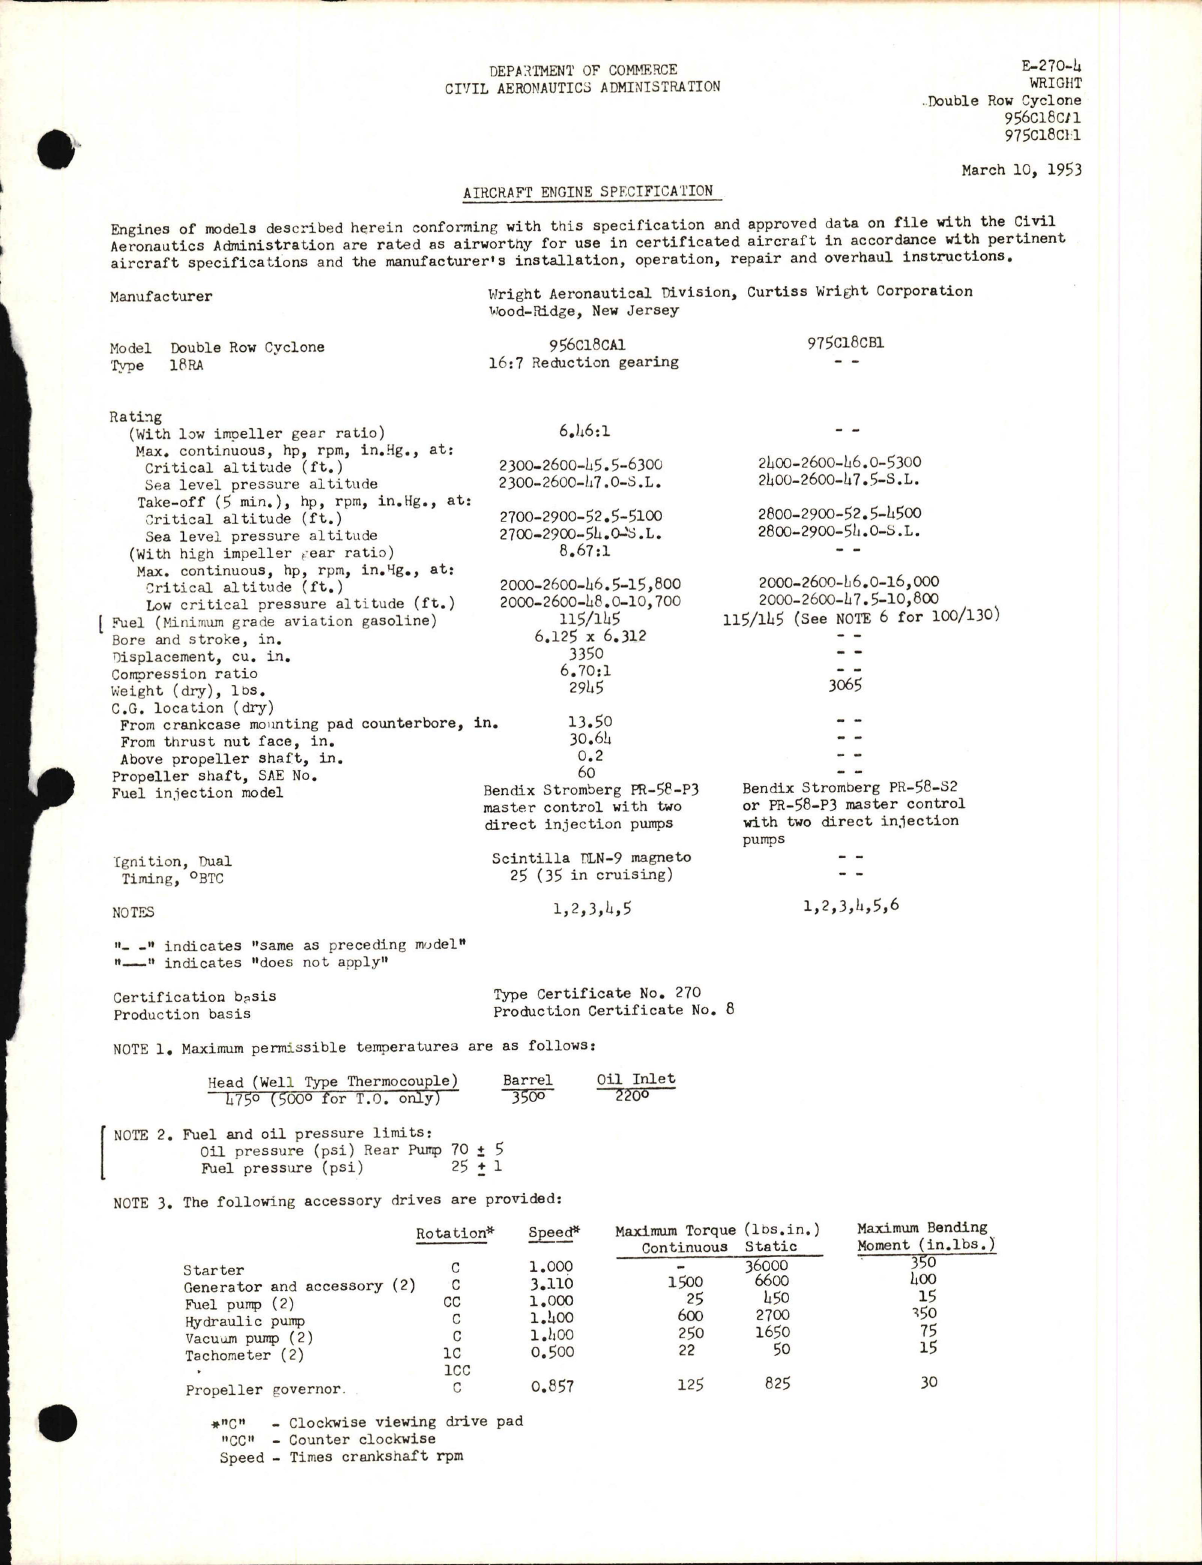 Sample page 1 from AirCorps Library document: 956C18CA1 and 975C18CB1 Double Row Cyclone